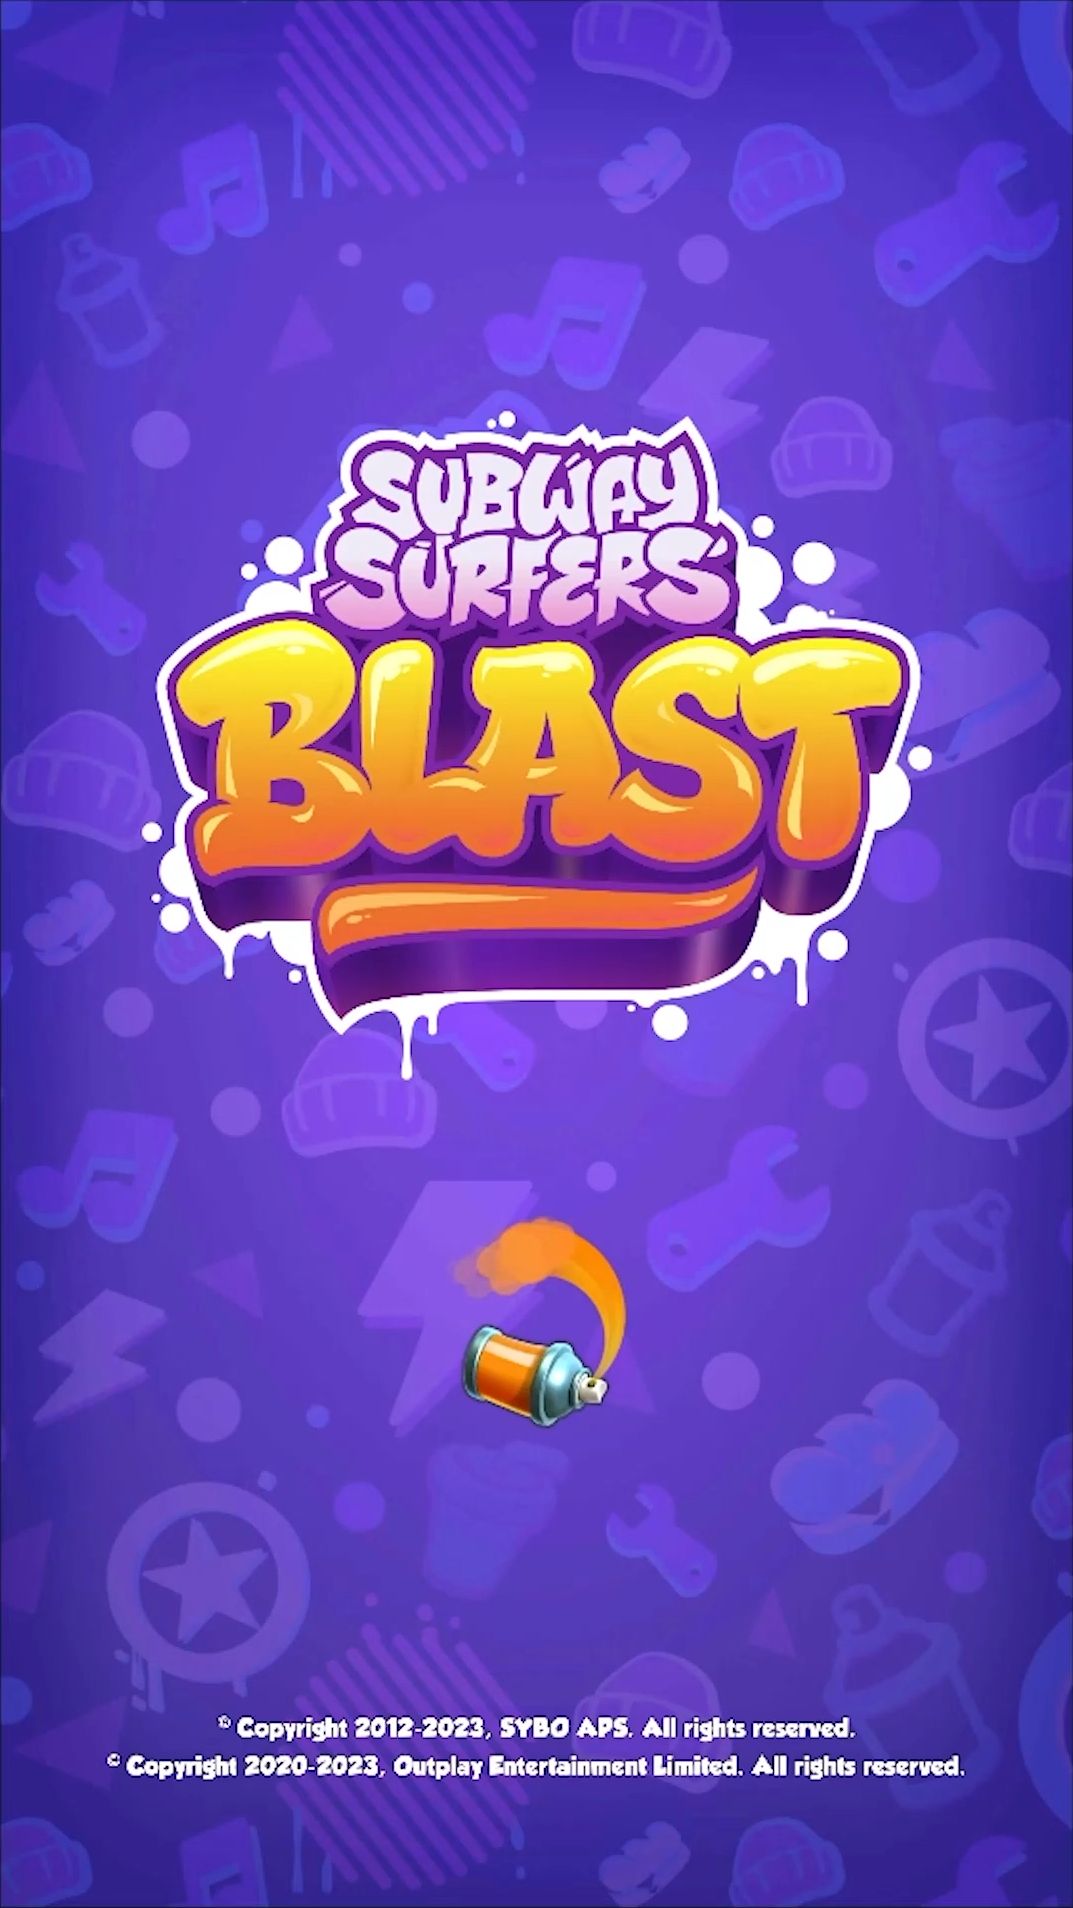 Full version of Android Offline game apk Subway Surfers Blast for tablet and phone.